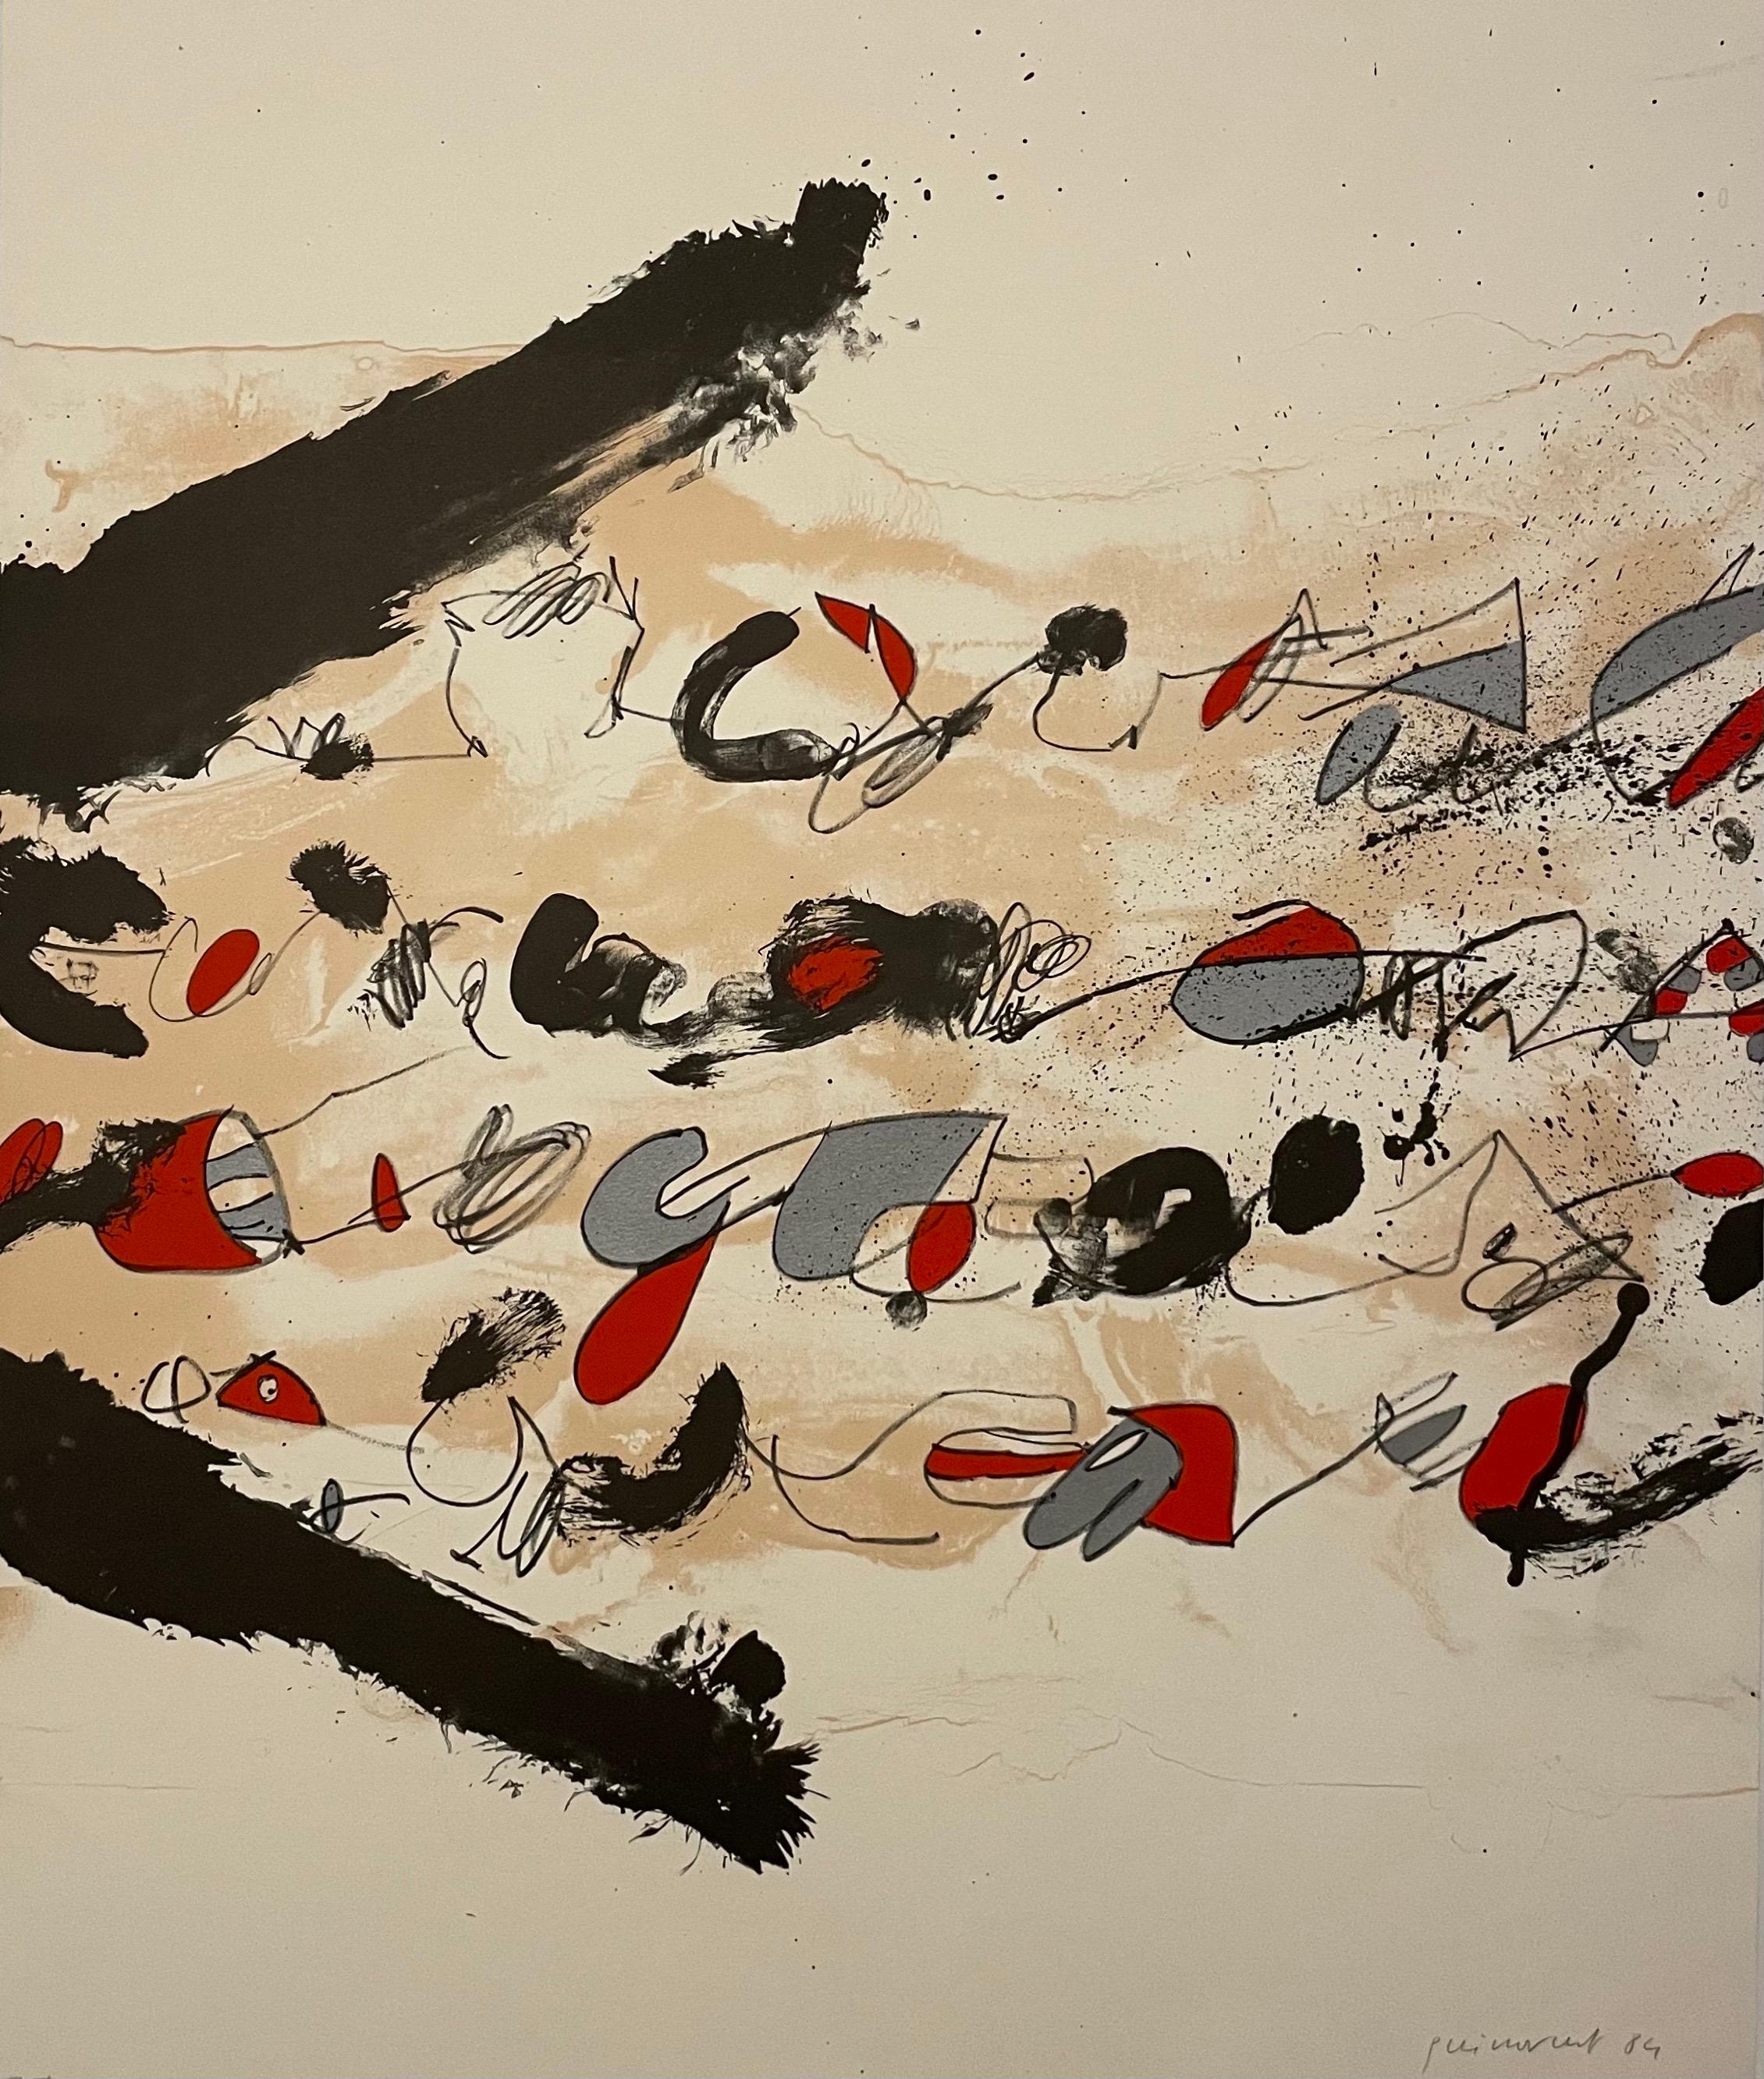 Guinovart, Josep (Spanish/Catalan, 1927-2007), Untitled Abstract, 1984, lithograph on paper, hand signed, dated and marked E.A. (artist's proof) in pencil at bottom, full sheet 26.75 x 22 inches, unframed.


Josep Guinovart (1927 –2007) was a